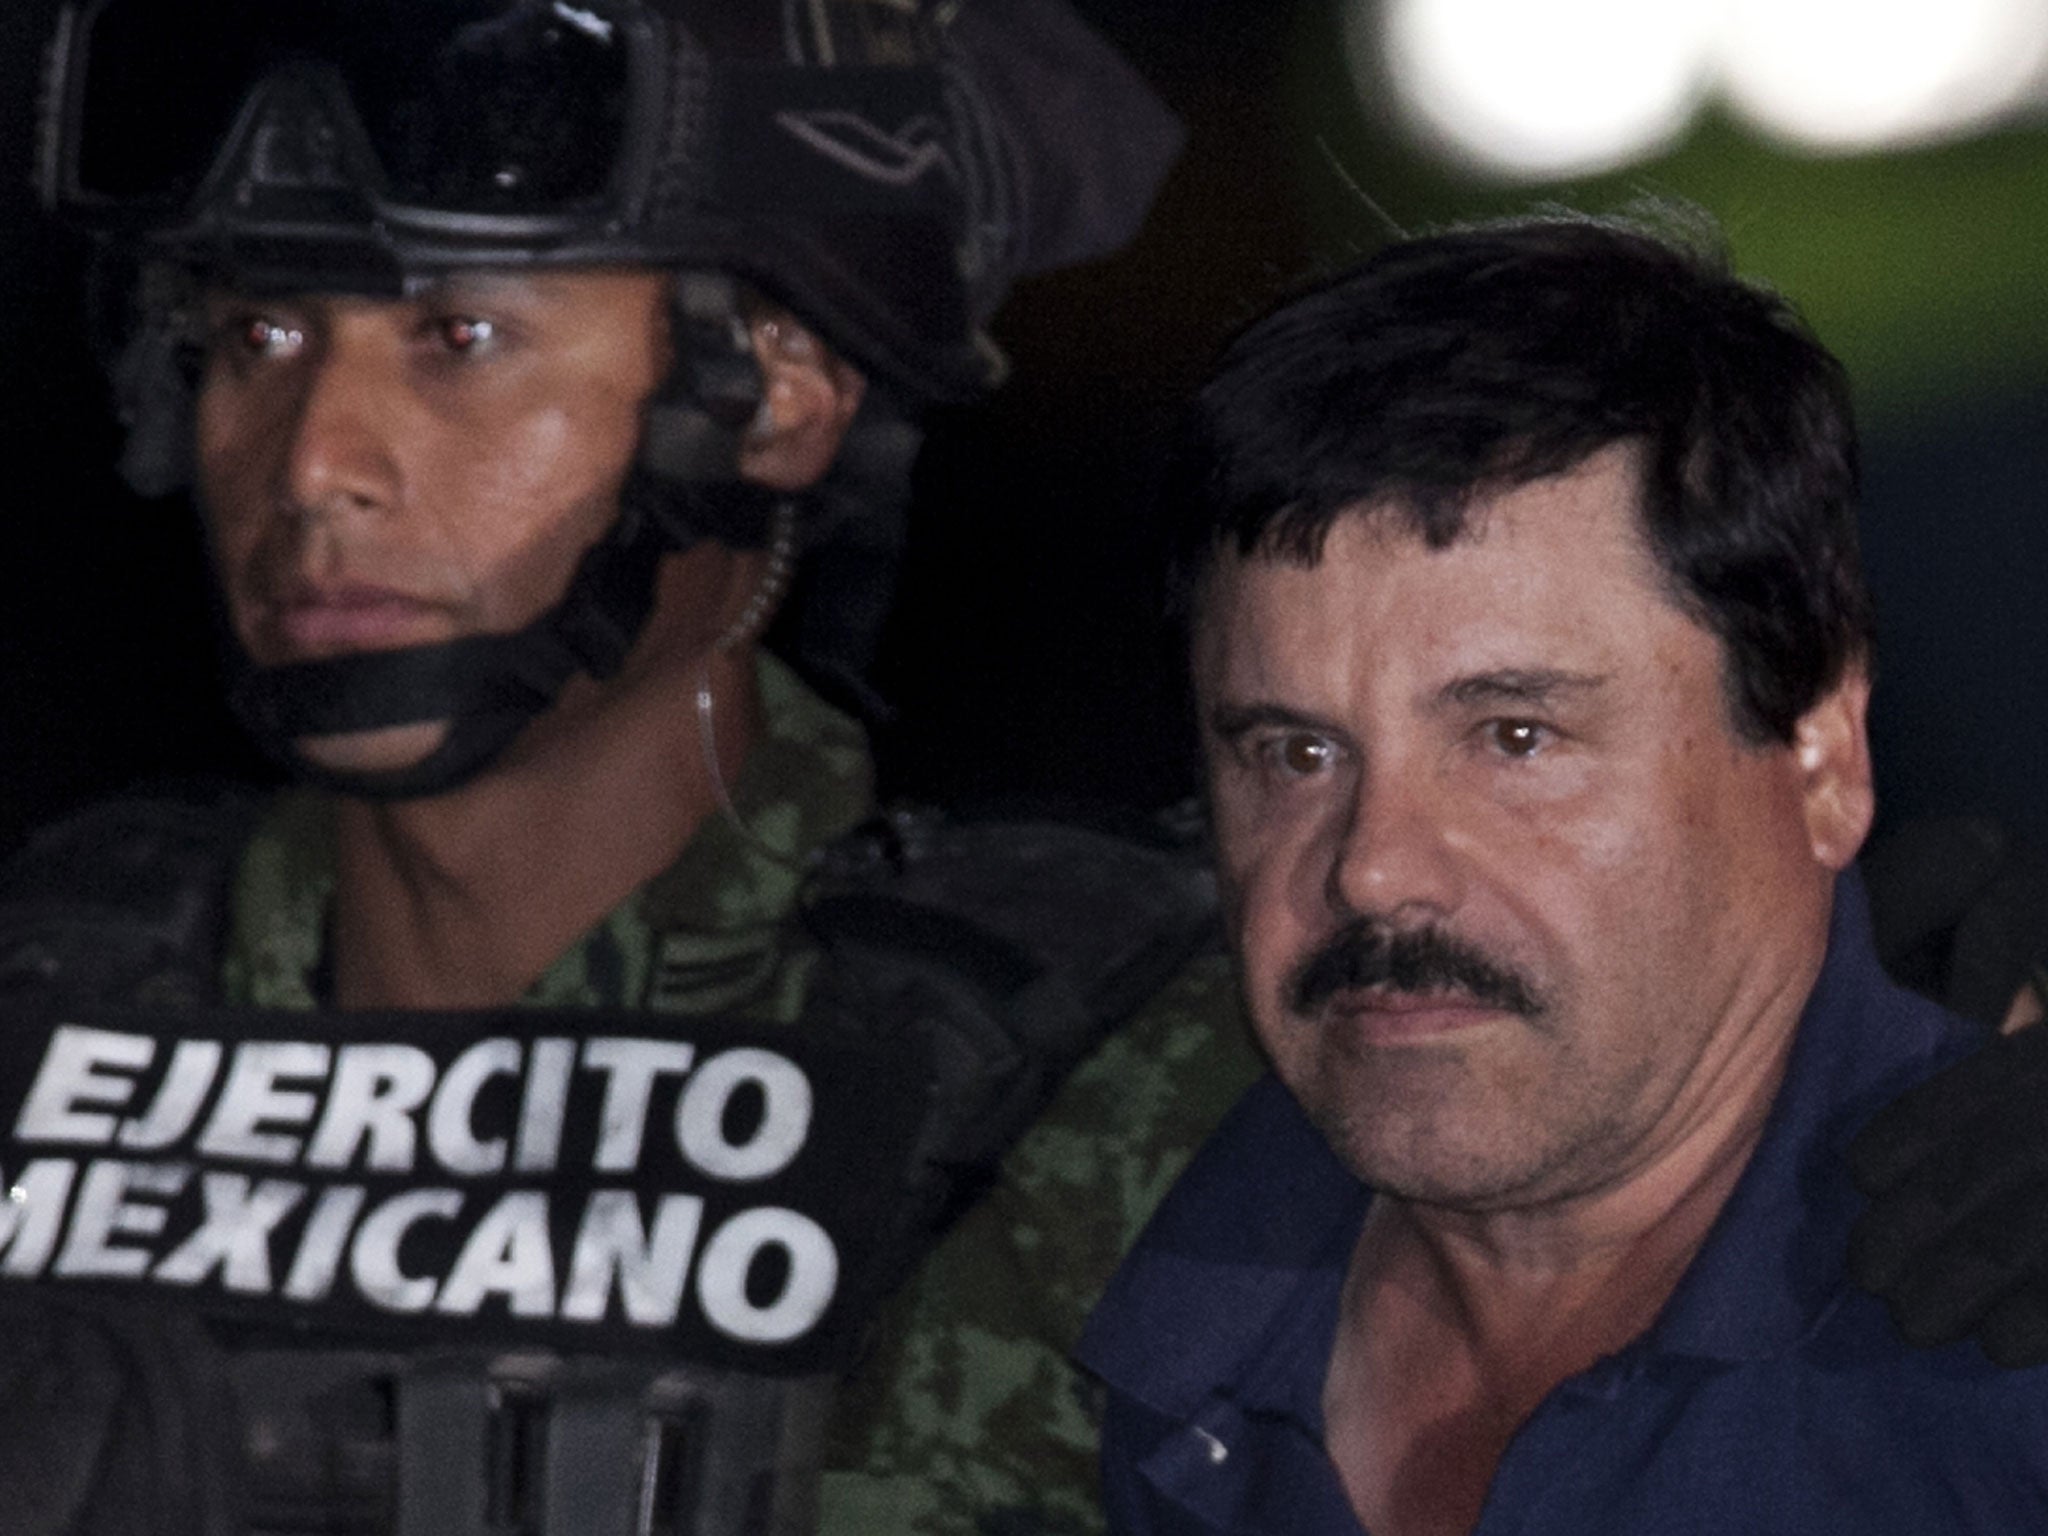 Mexican authorities looking to question Sean Penn over El Chapo Rolling Stone interview The Independent The Independent